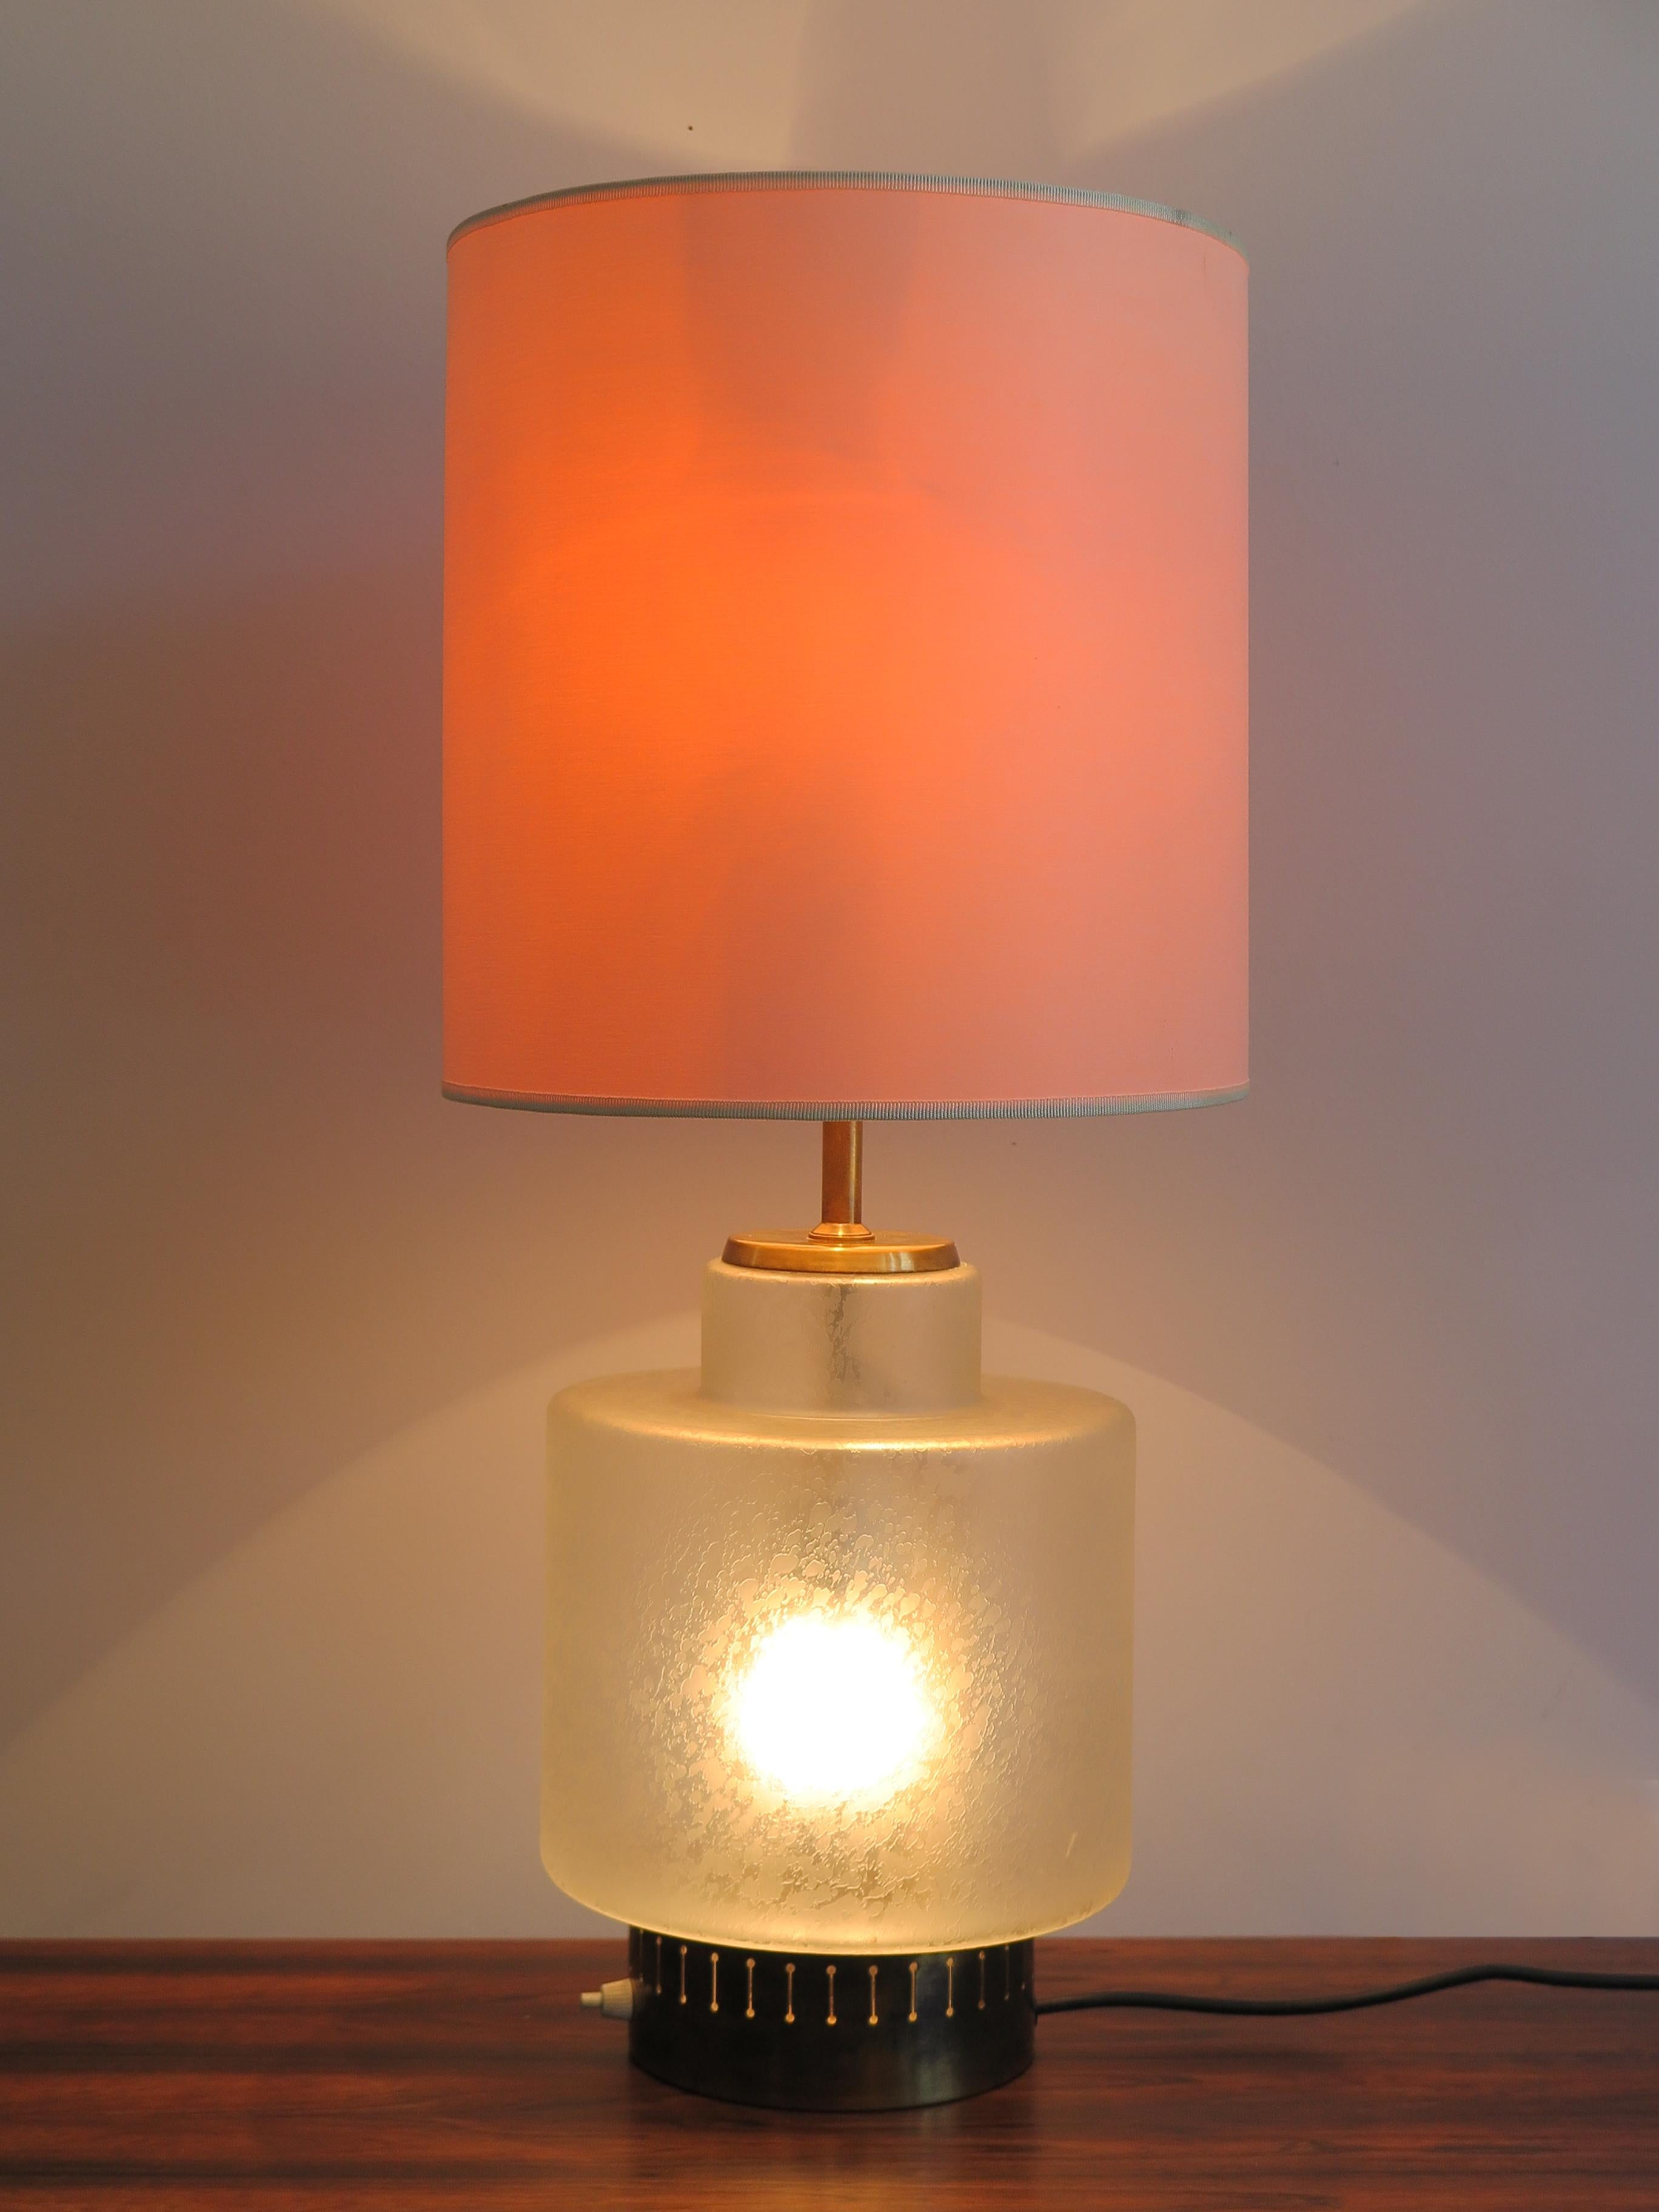 Italian Mid-Century Modern design Stilnovo table lamp shade, 
brass and glass base, lampshade with original fabric, double switch-on.
Manufacturing label

Please note that the lamp is original of the period and this shows normal signs of age and